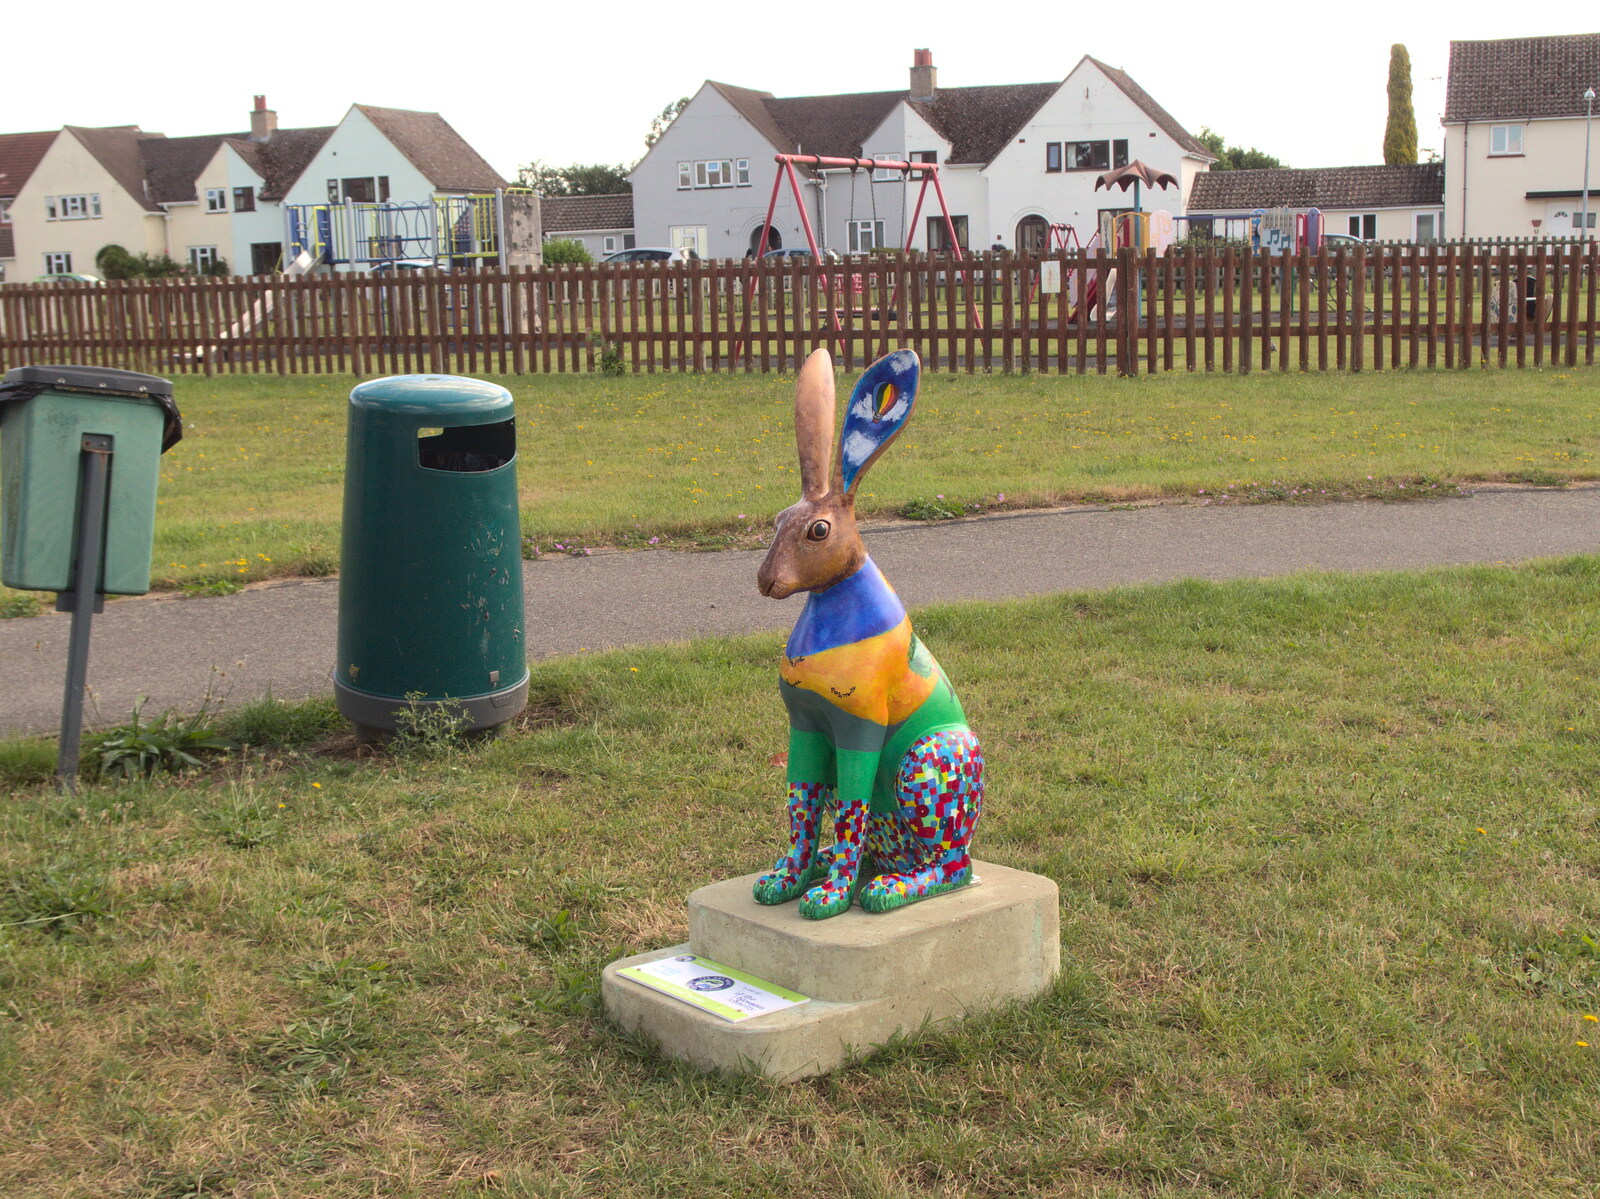 Sarah Bentley's hare on Belland's Way from Meg-fest, and Sean Visits, Bressingham and Brome, Suffolk - 1st August 2021